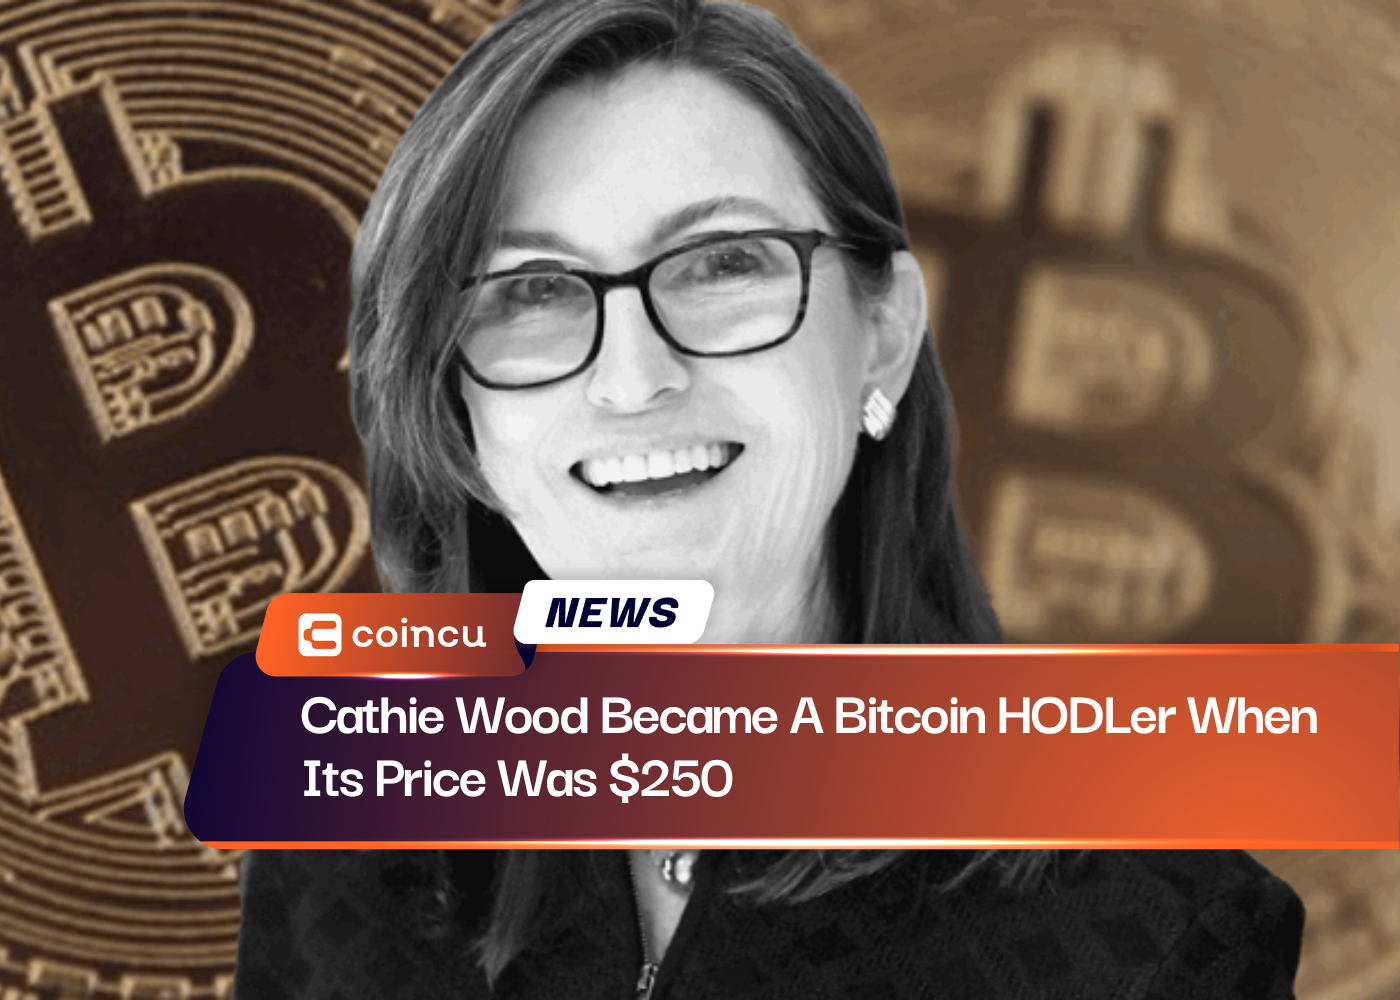 Cathie Wood Became A Bitcoin HODLer When Its Price Was $250